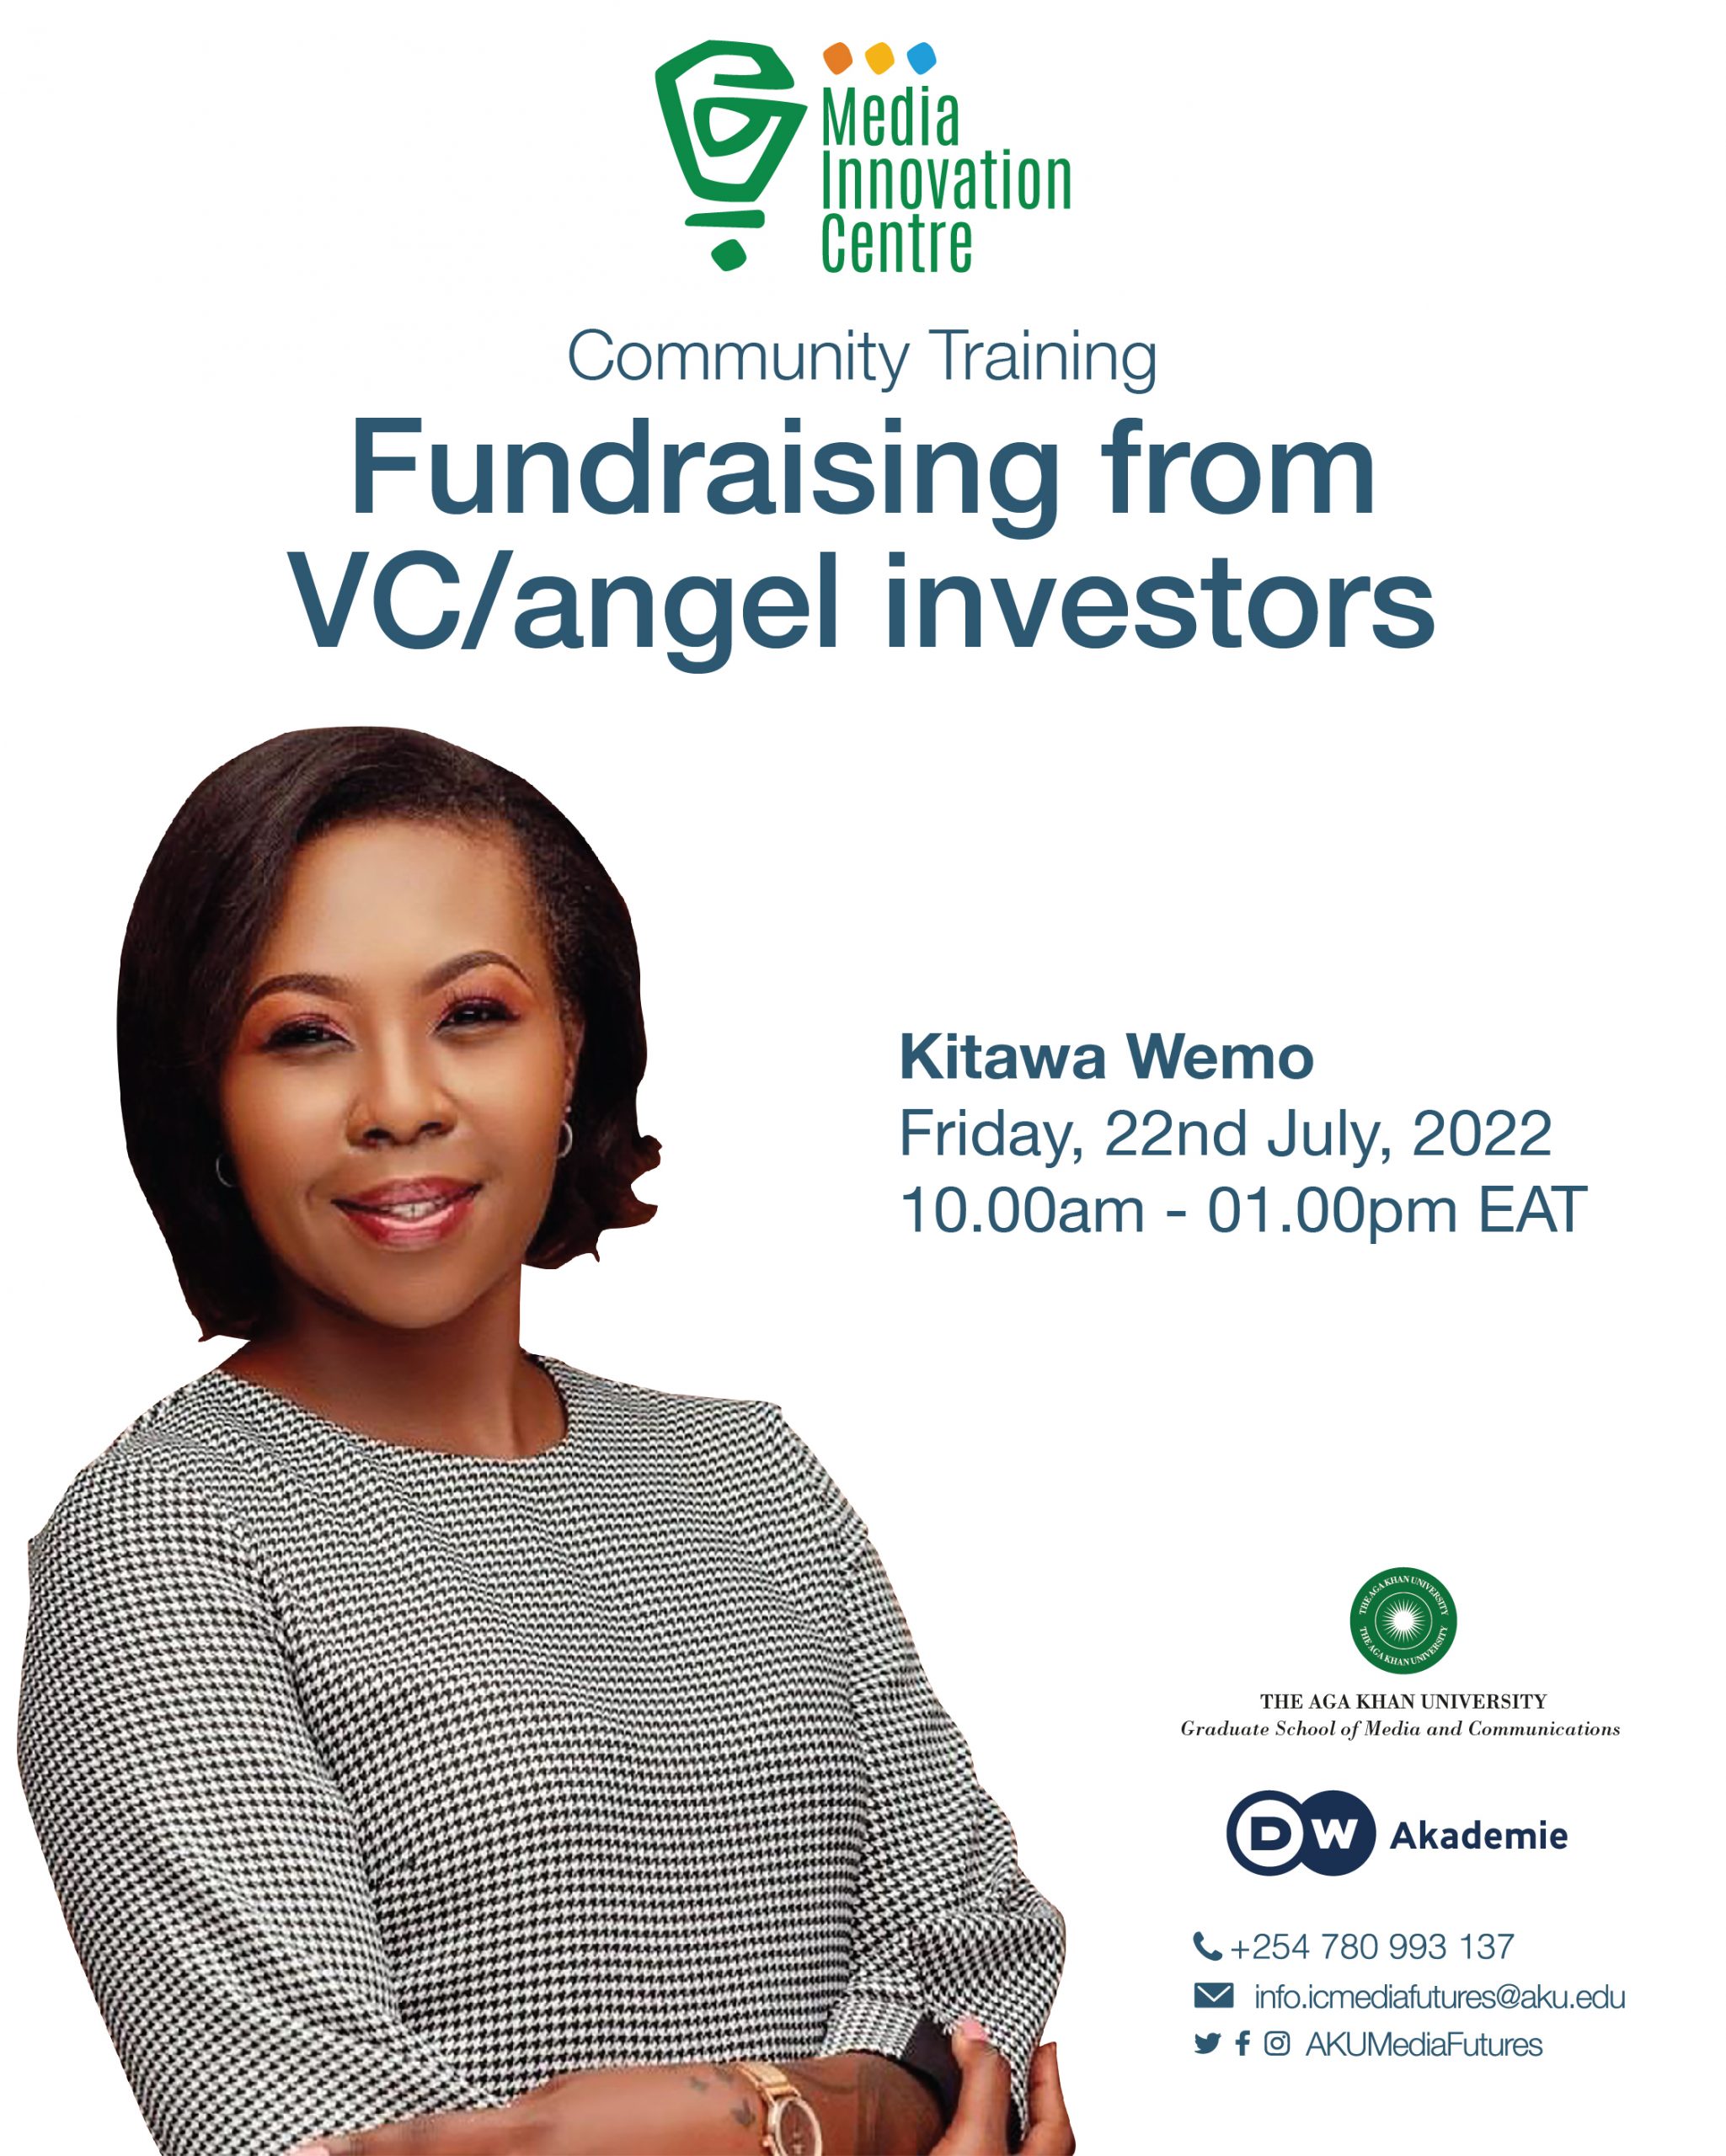  Fundraising from VC/angel investors